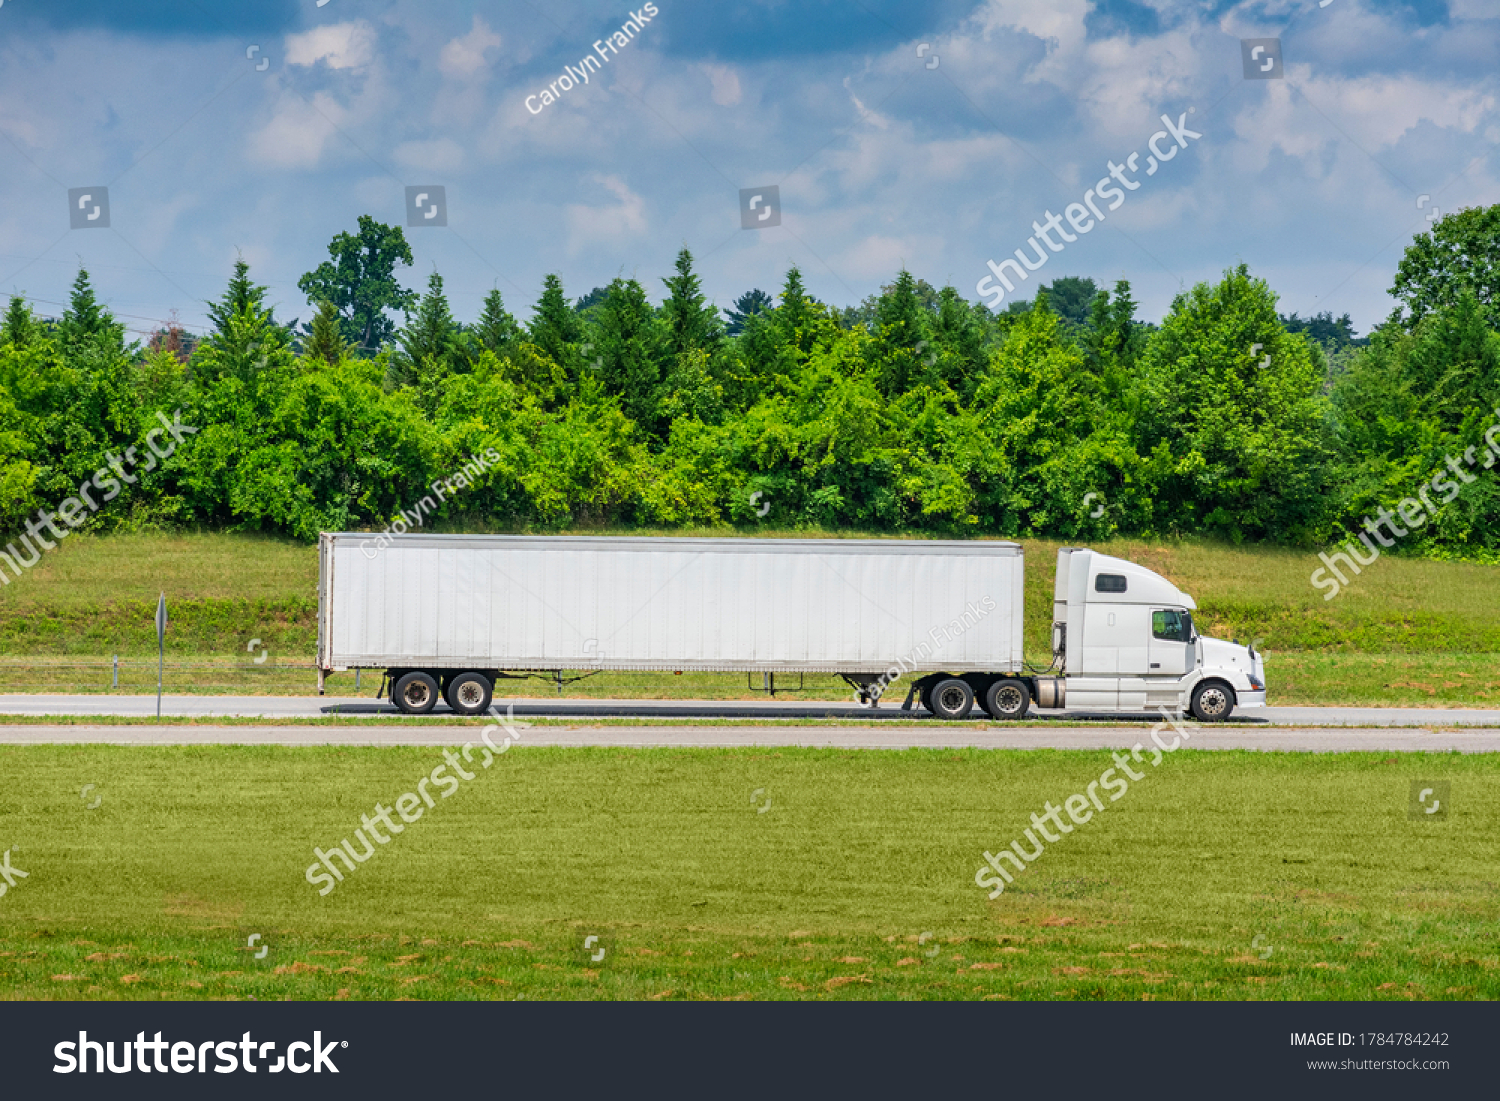 Horizontal side view shot of a white tractor-trailer with a blank trailer that would make great copy space. #1784784242